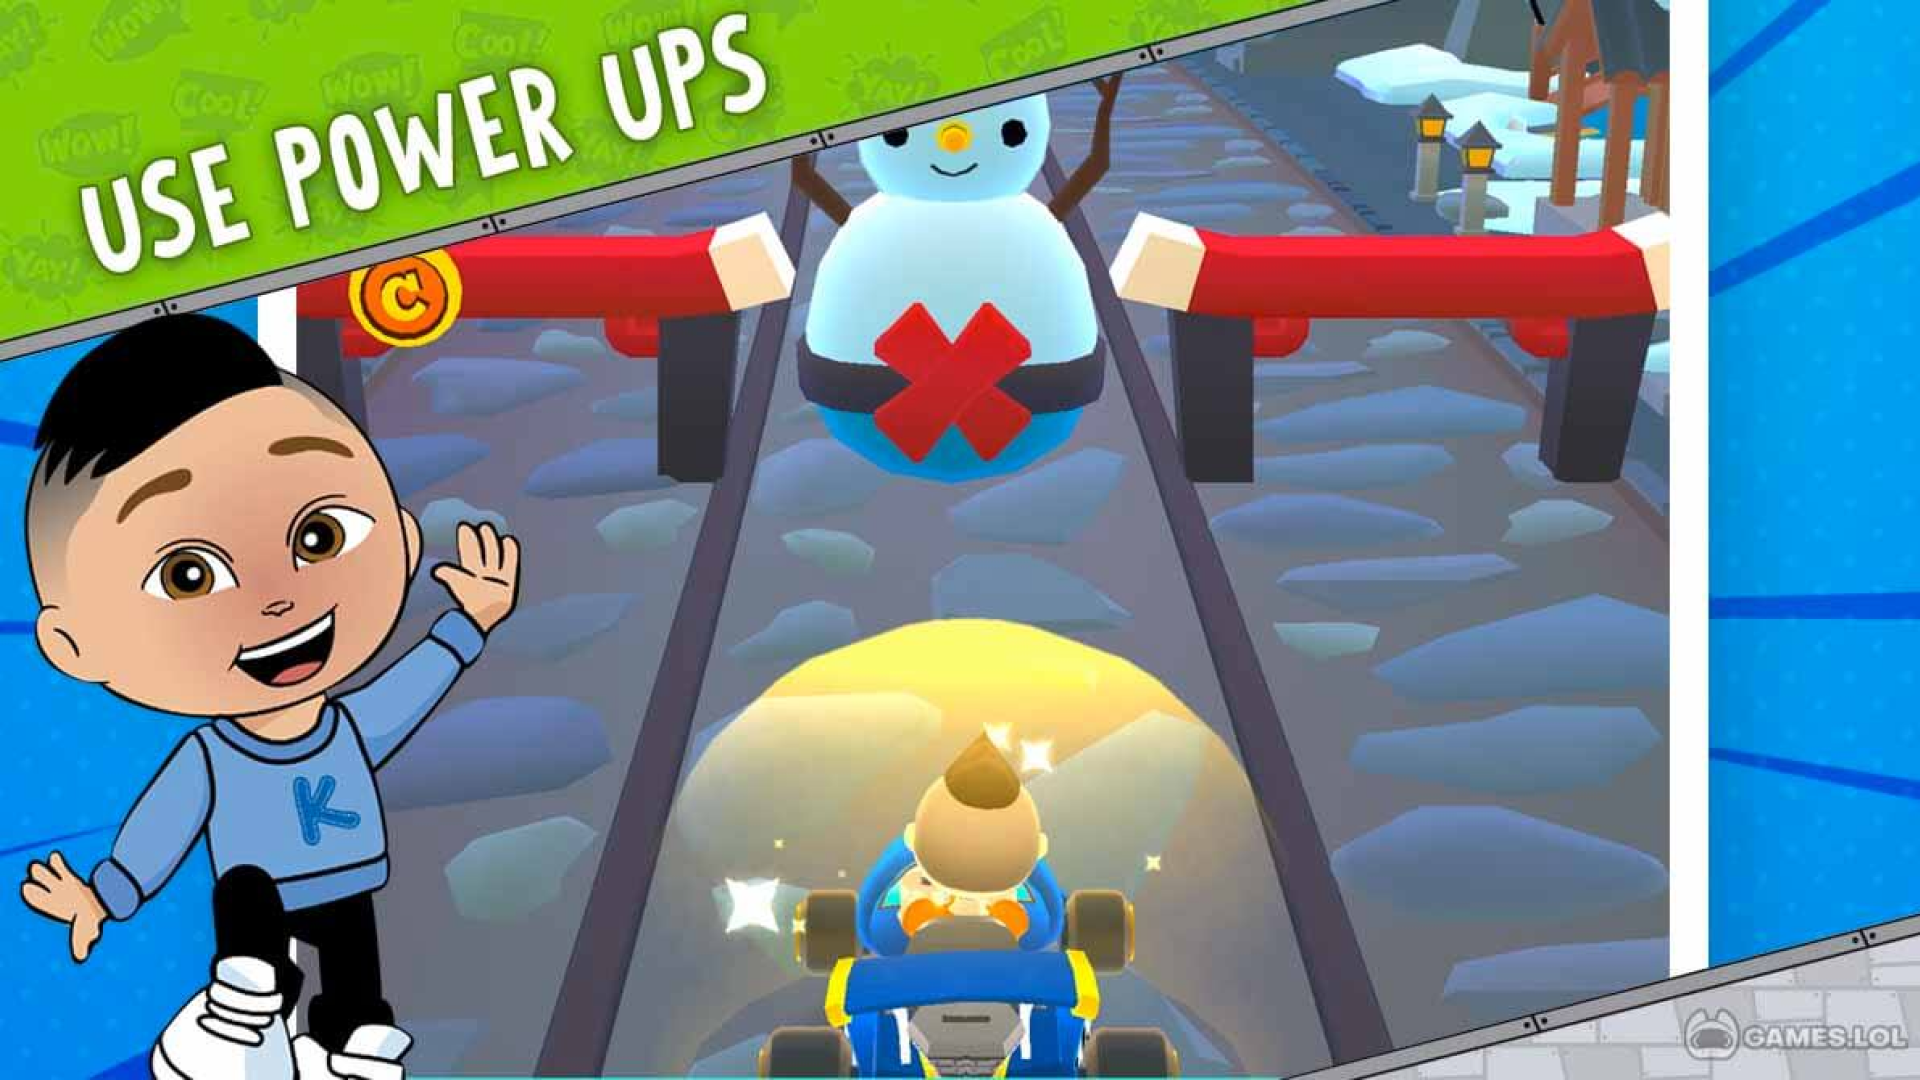 CKN gameplay powerups allowing the driver to use a shield protecting against obstacles